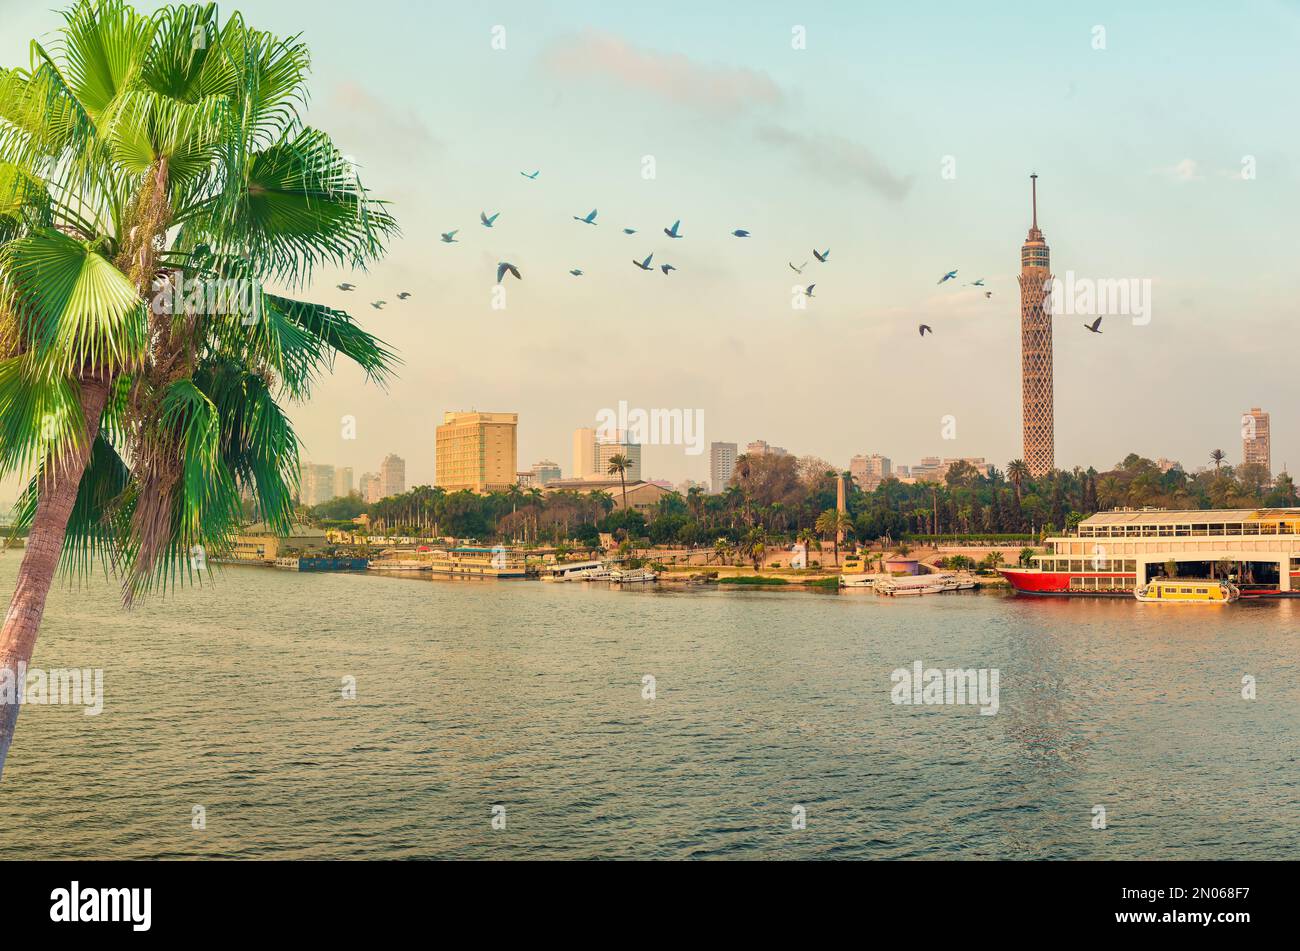 Seagull over downtown of Cairo at sunset Stock Photo